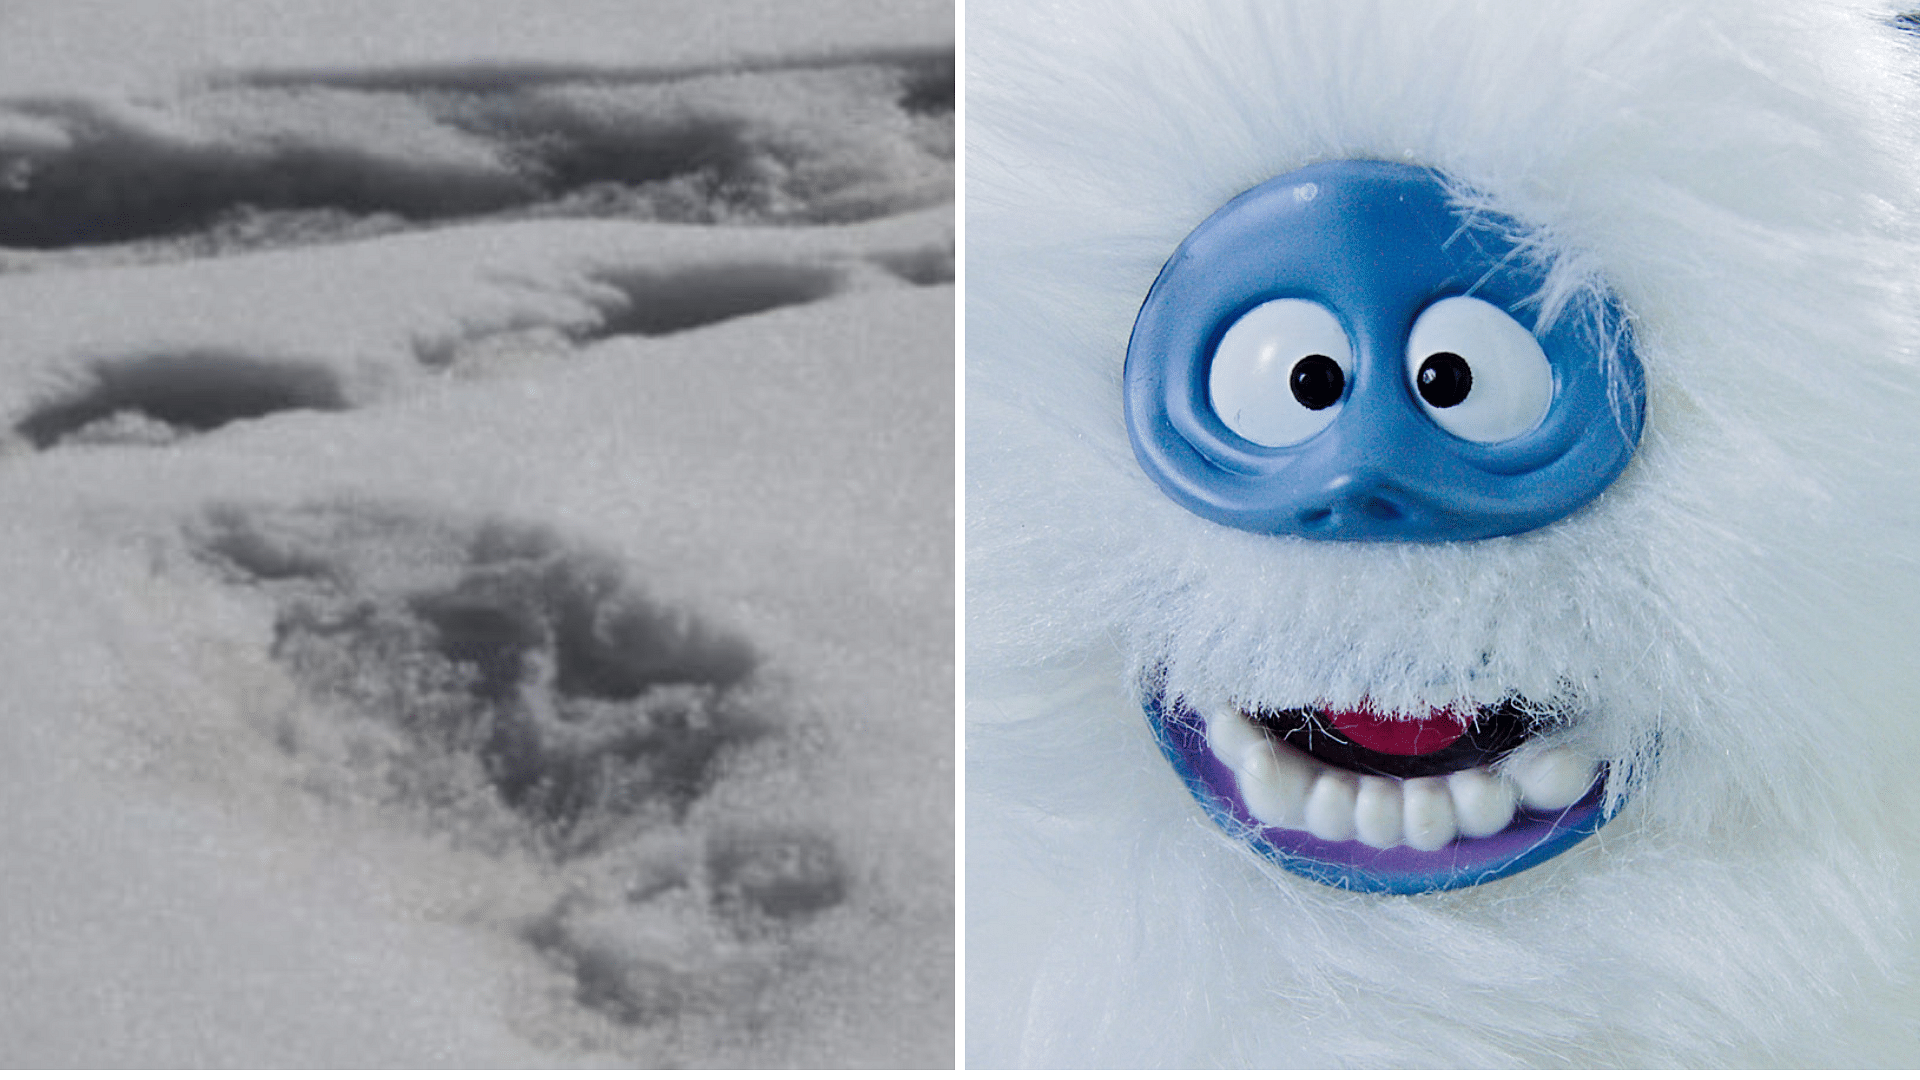 Indian Army’s claim about spotting the mythical creature Yeti had Twitter talking.